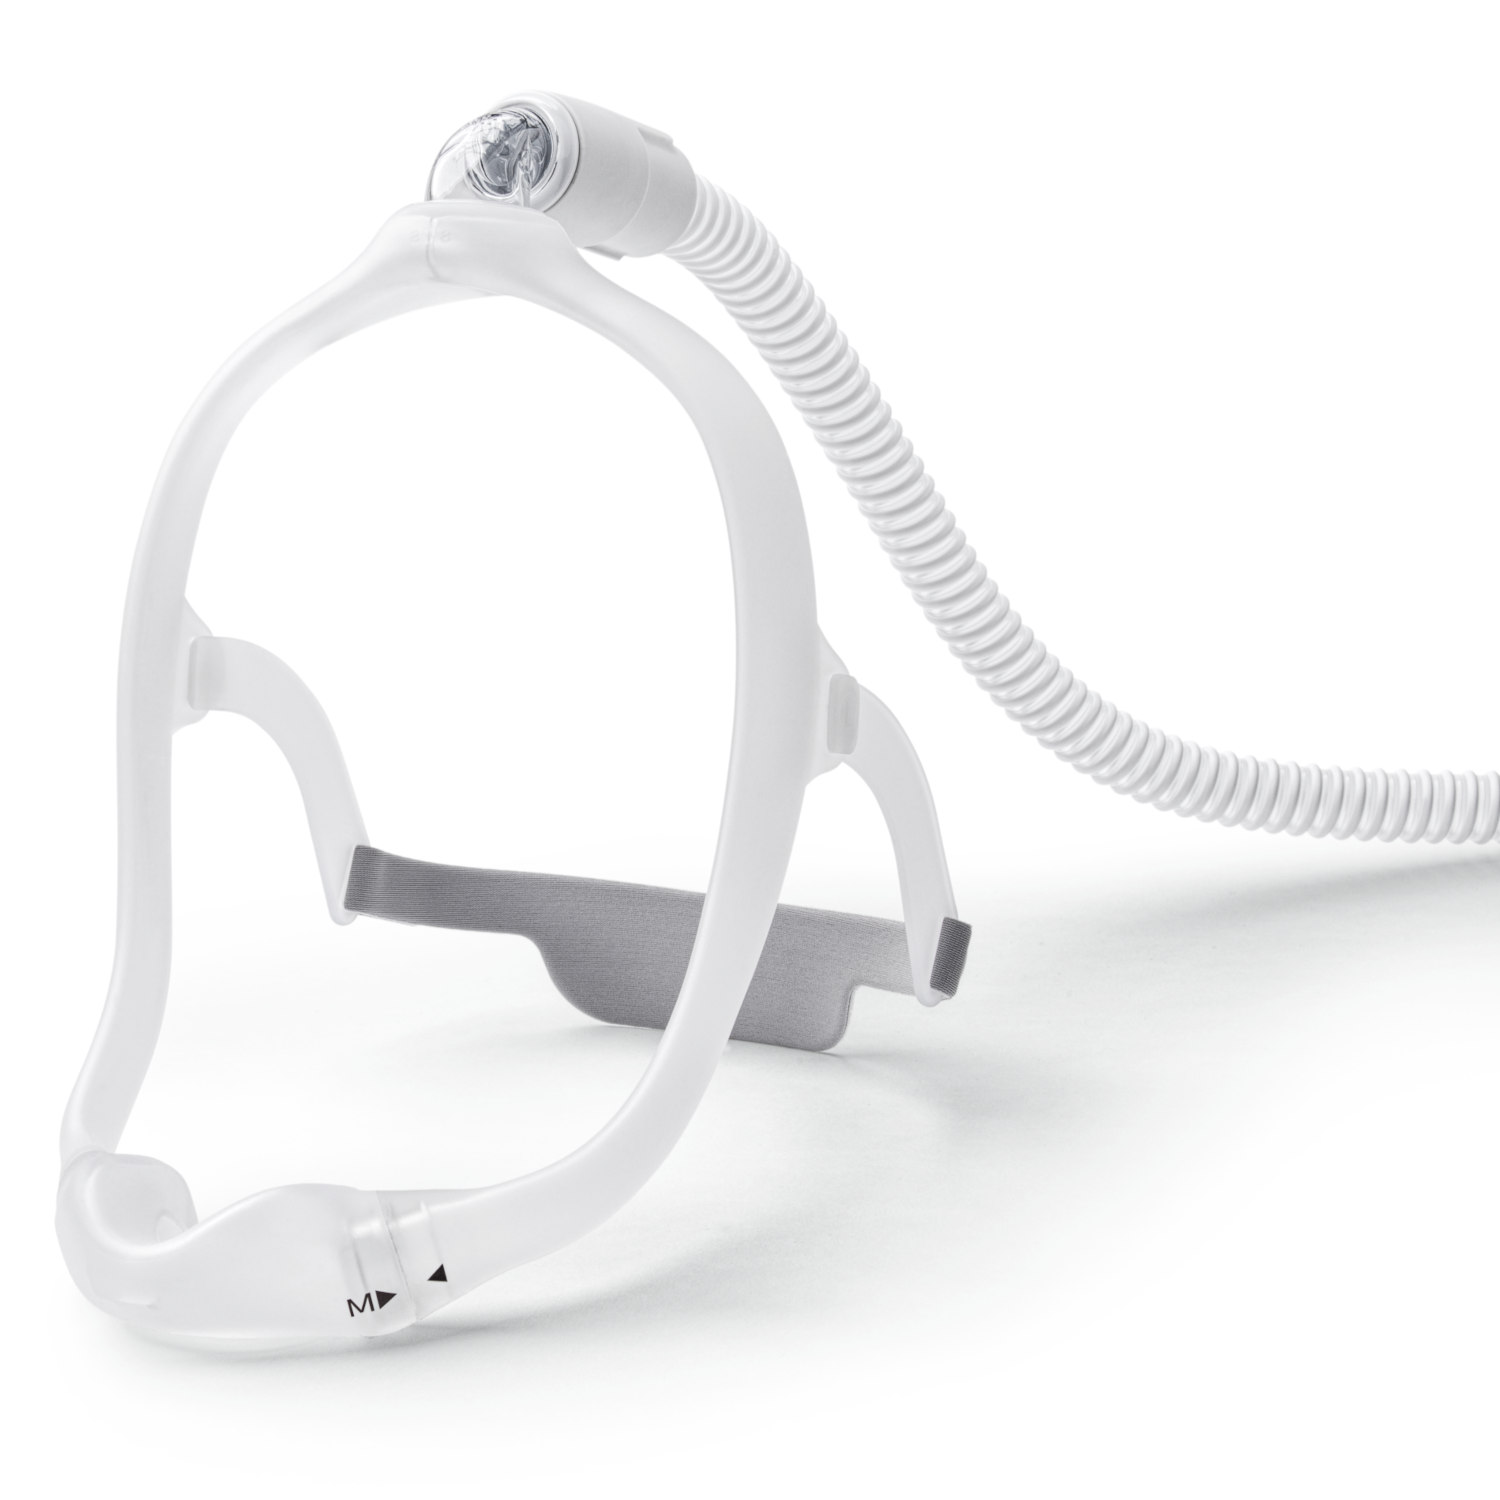 Dreamwear Nasal CPAP Mask with Headgear Arms - Philips